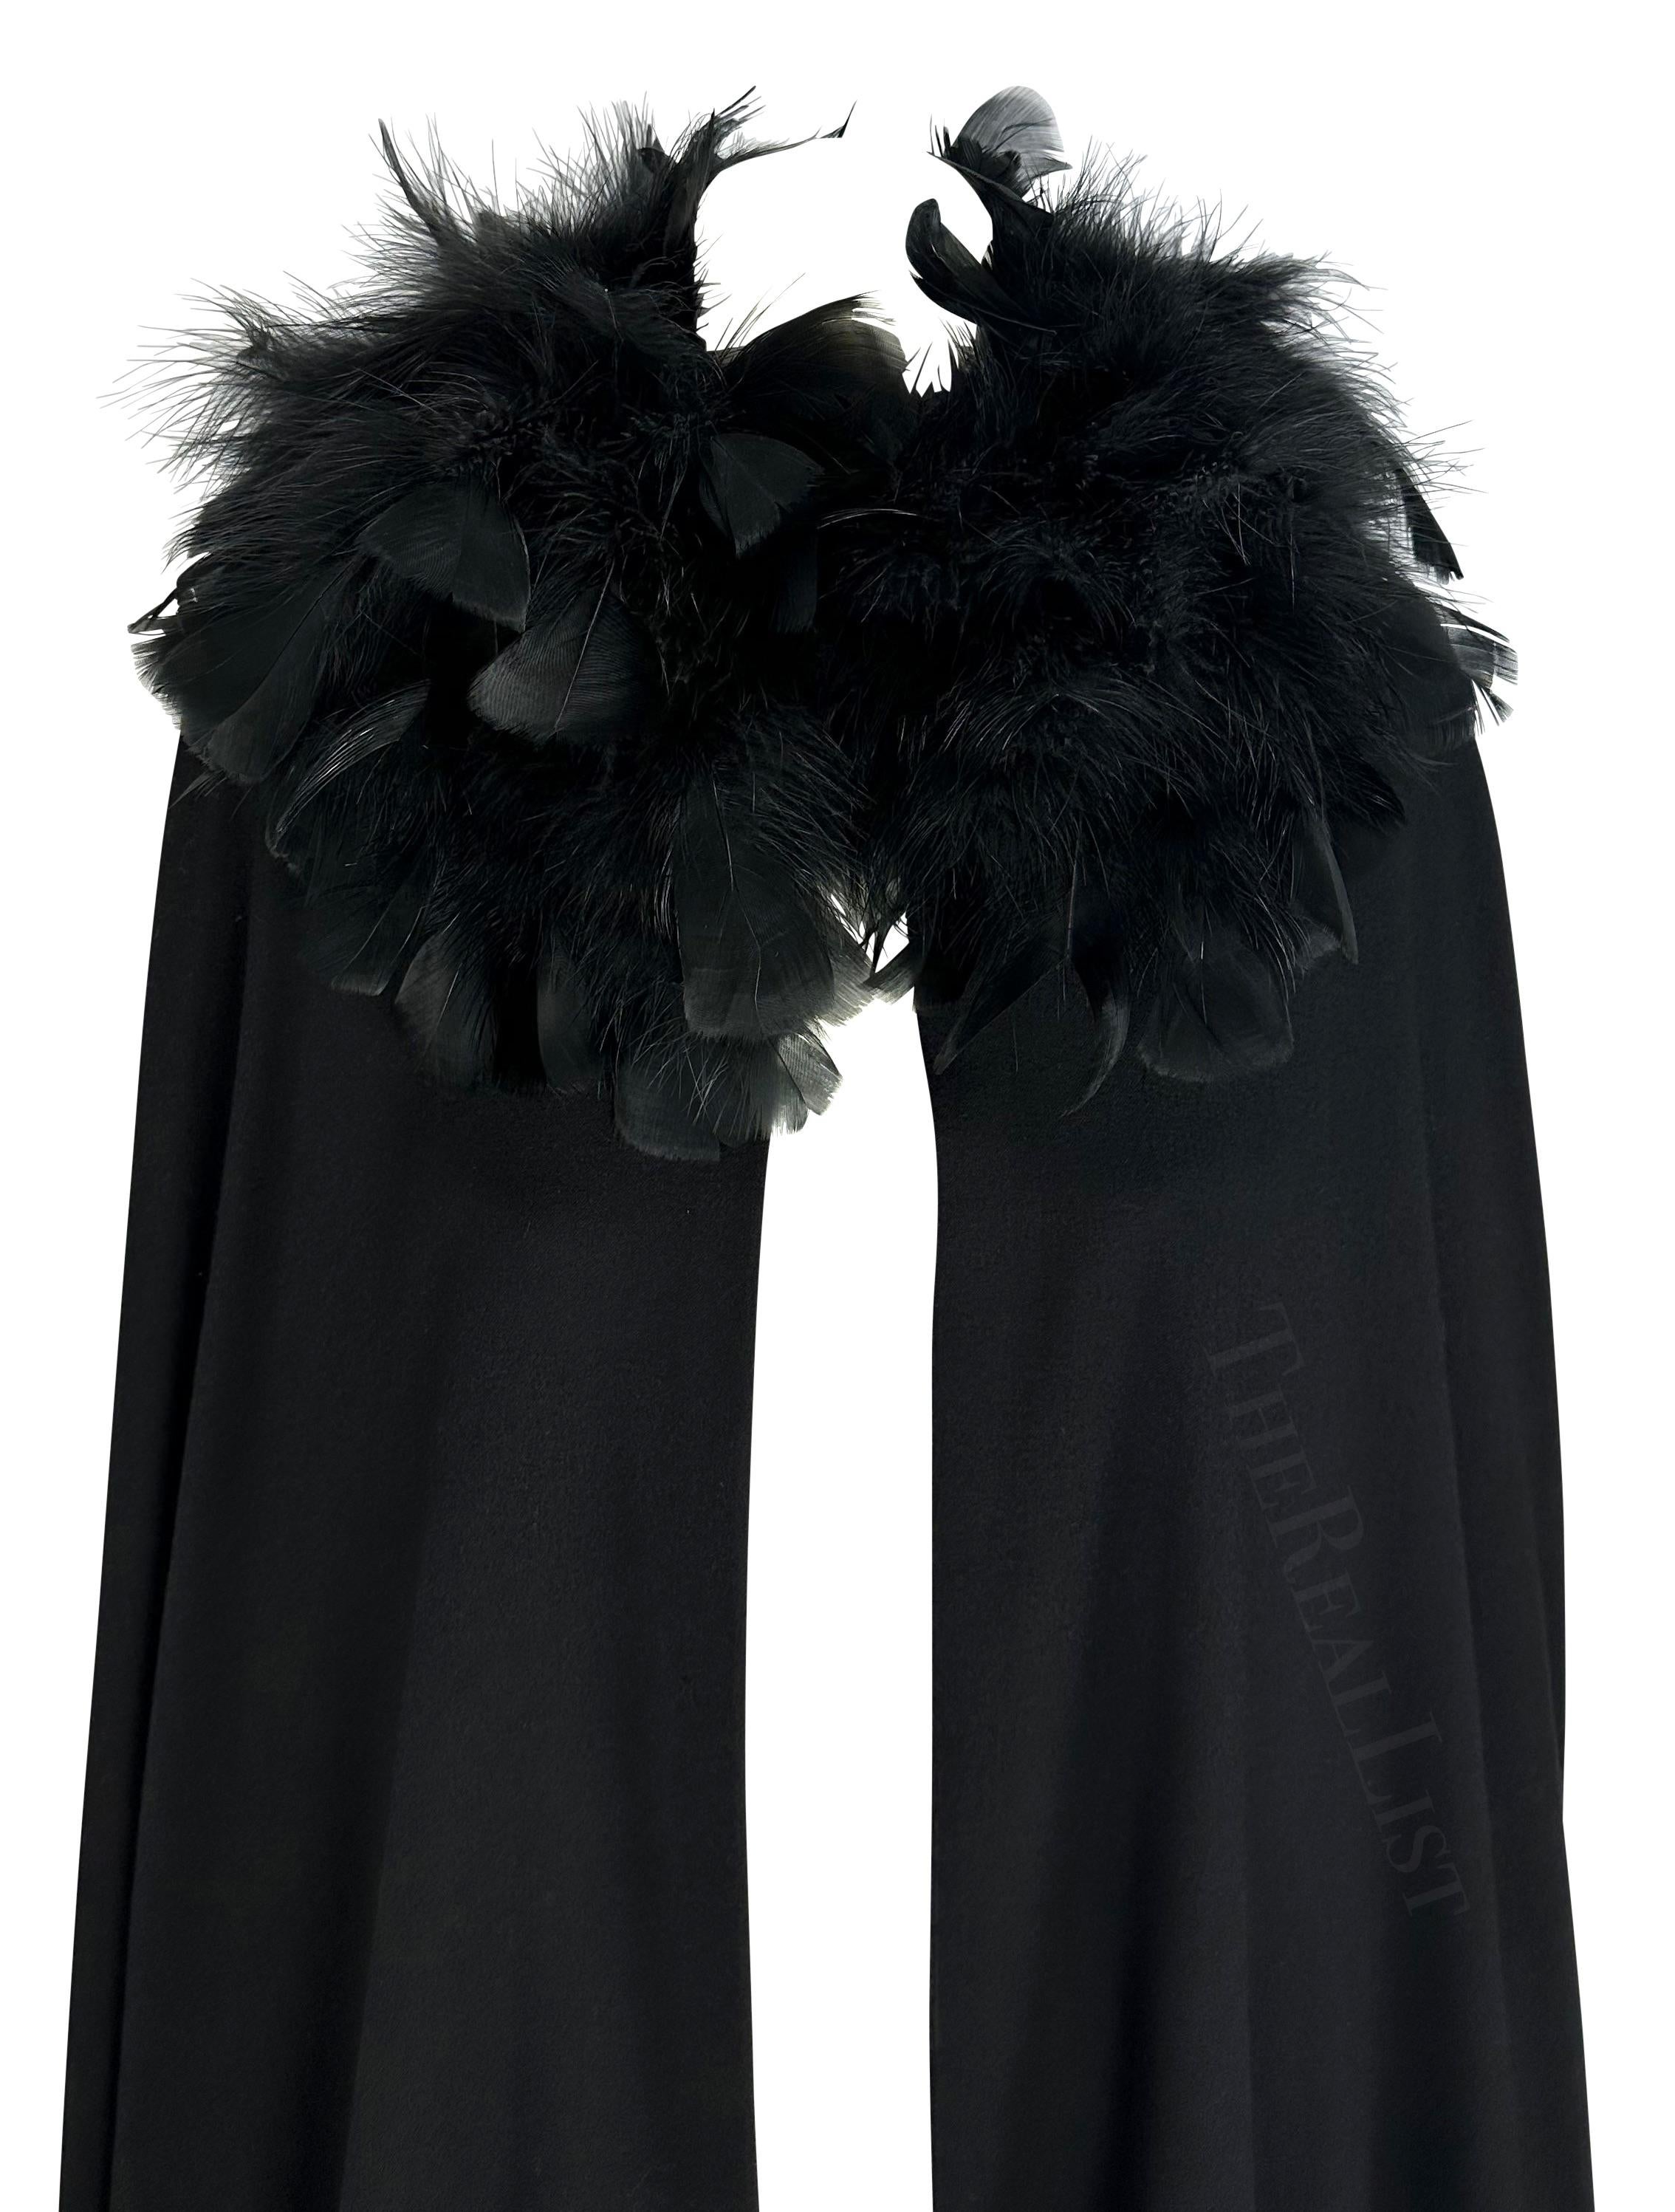 Presenting a gorgeous black Yves Saint Laurent haute couture cape, designed by Yves Saint Laurent. From the 1970s, this floor-length wool cape beautifully drapes off the shoulder. Adorned with voluminous black feathers at the neckline, this handmade